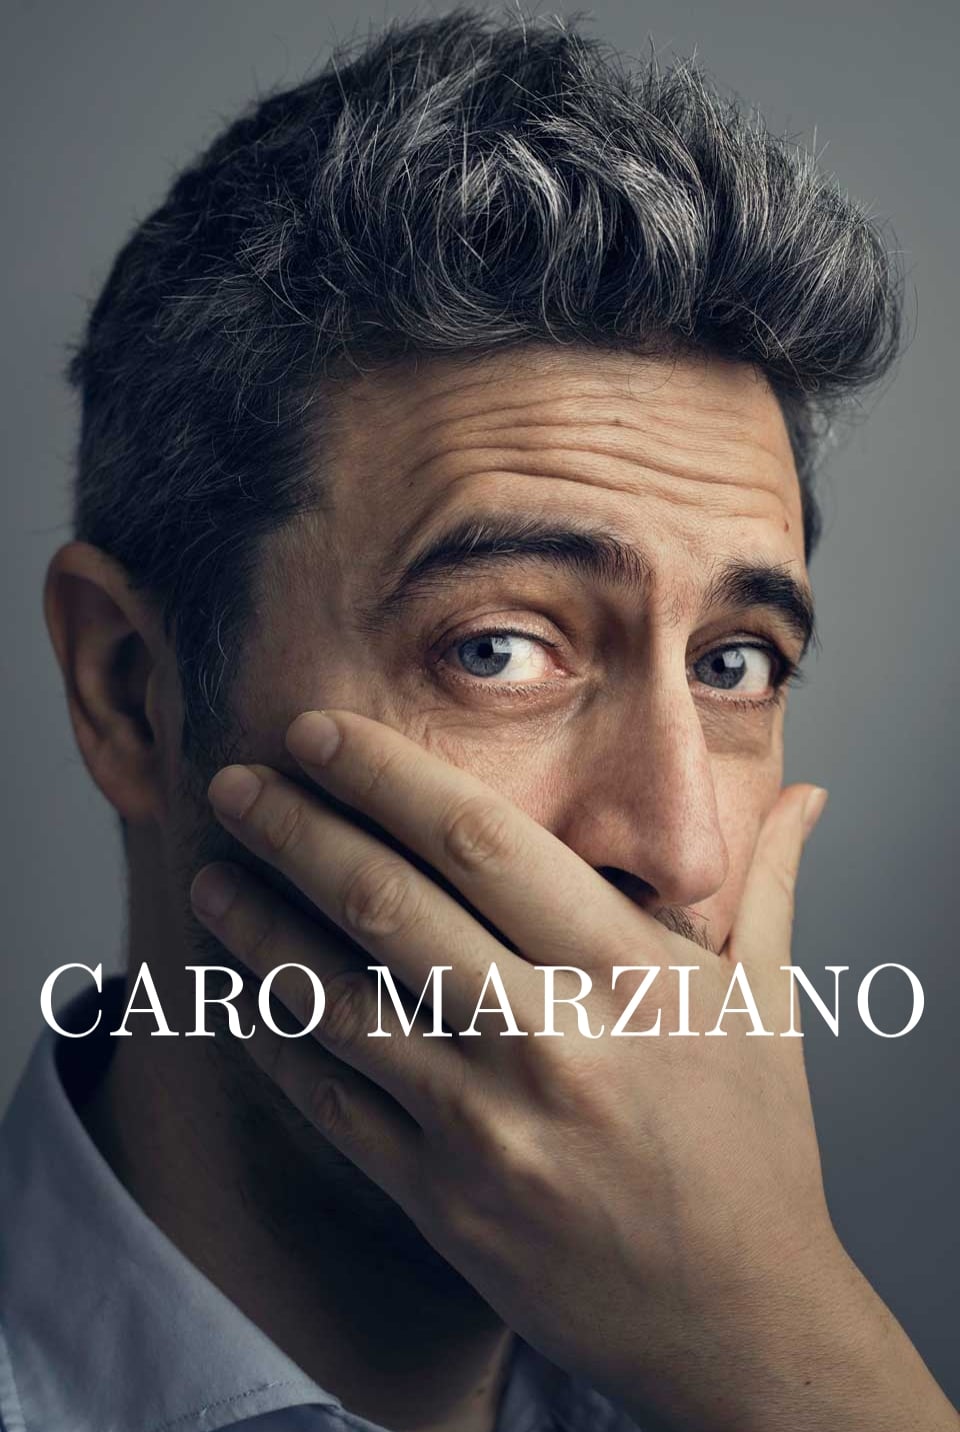 Caro Marziano TV Shows About Social Documentary